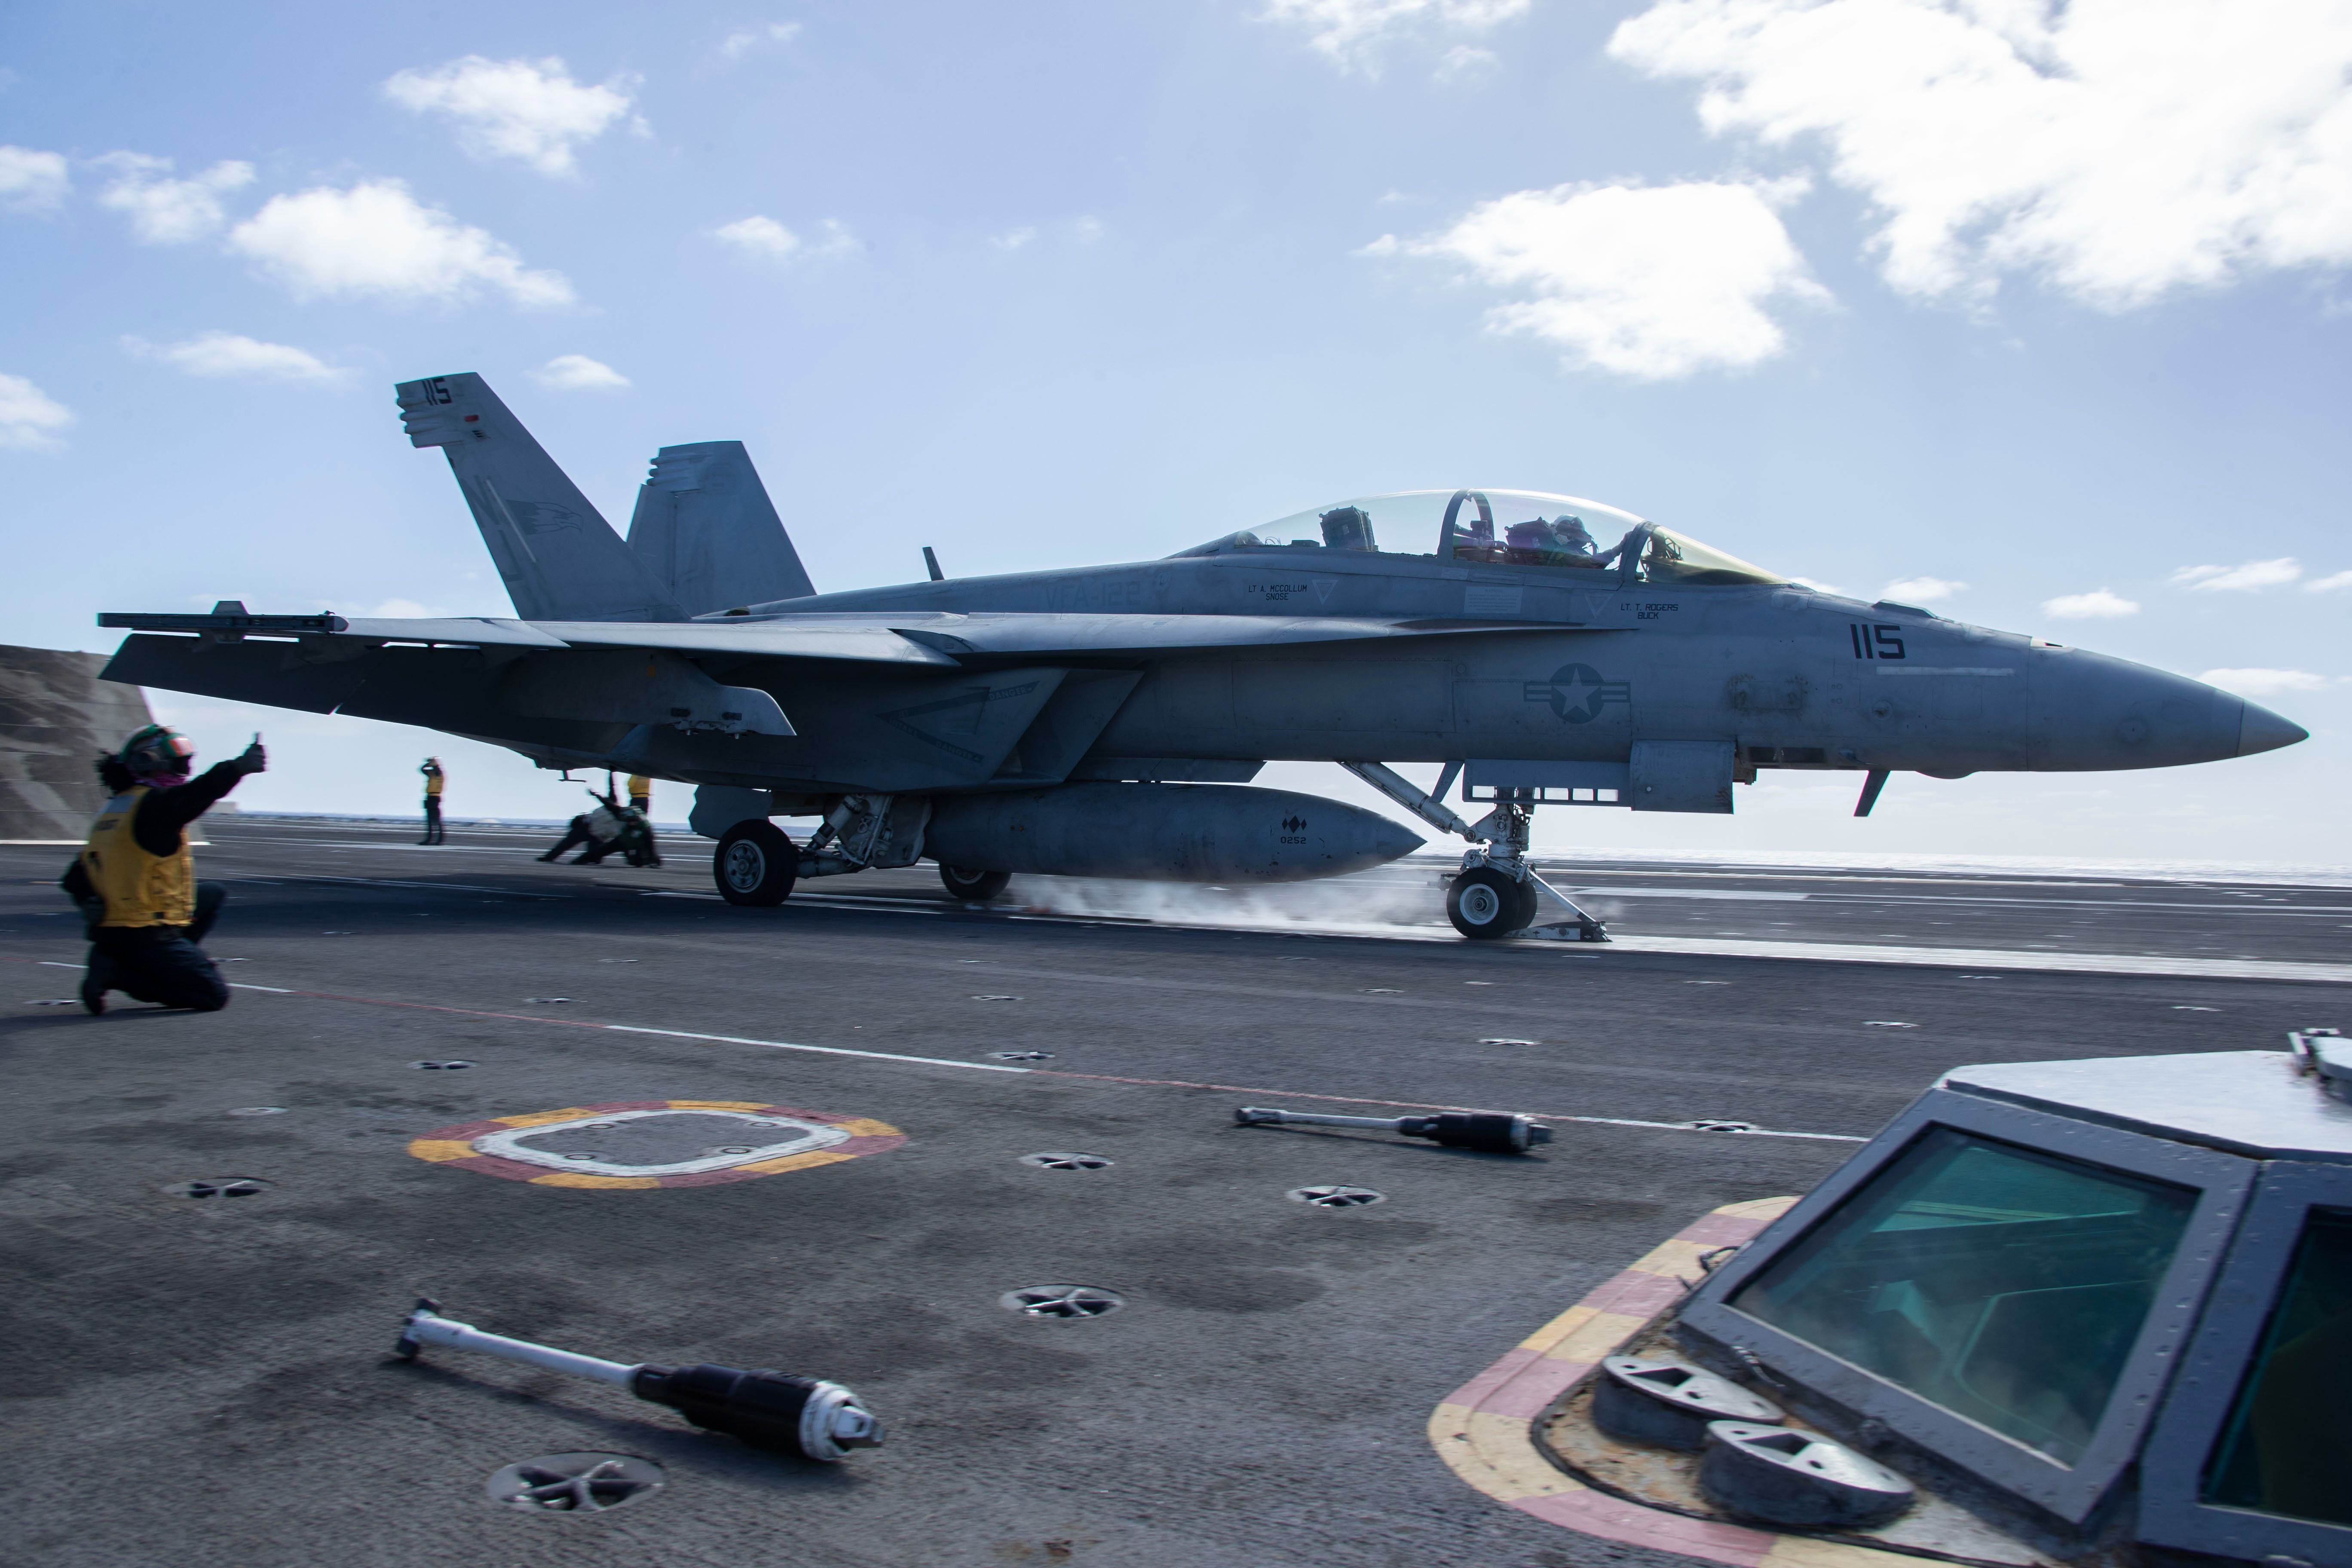 An F/A-18E Super Hornet assigned to Strike Fighter Squadron (VFA) 122 prepares to launch from the flight deck of the Nimitz-class aircraft carrier USS Abraham Lincoln (CVN 72).